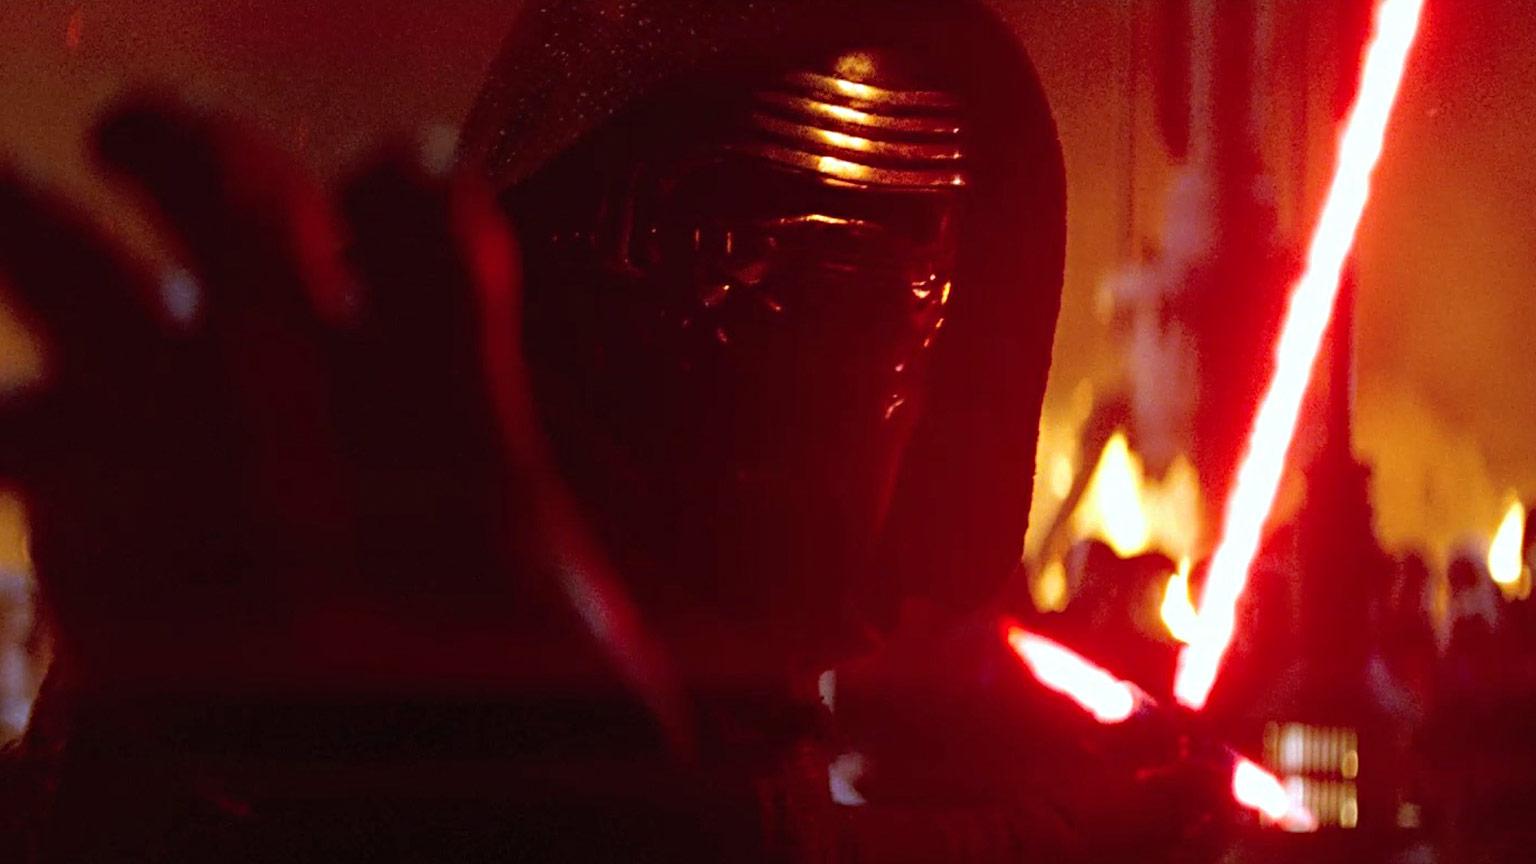 The rumored Star Wars series likely won't see Ben Solo don the iconic Kylo Ren mask, or wield his unique red lightsaber.